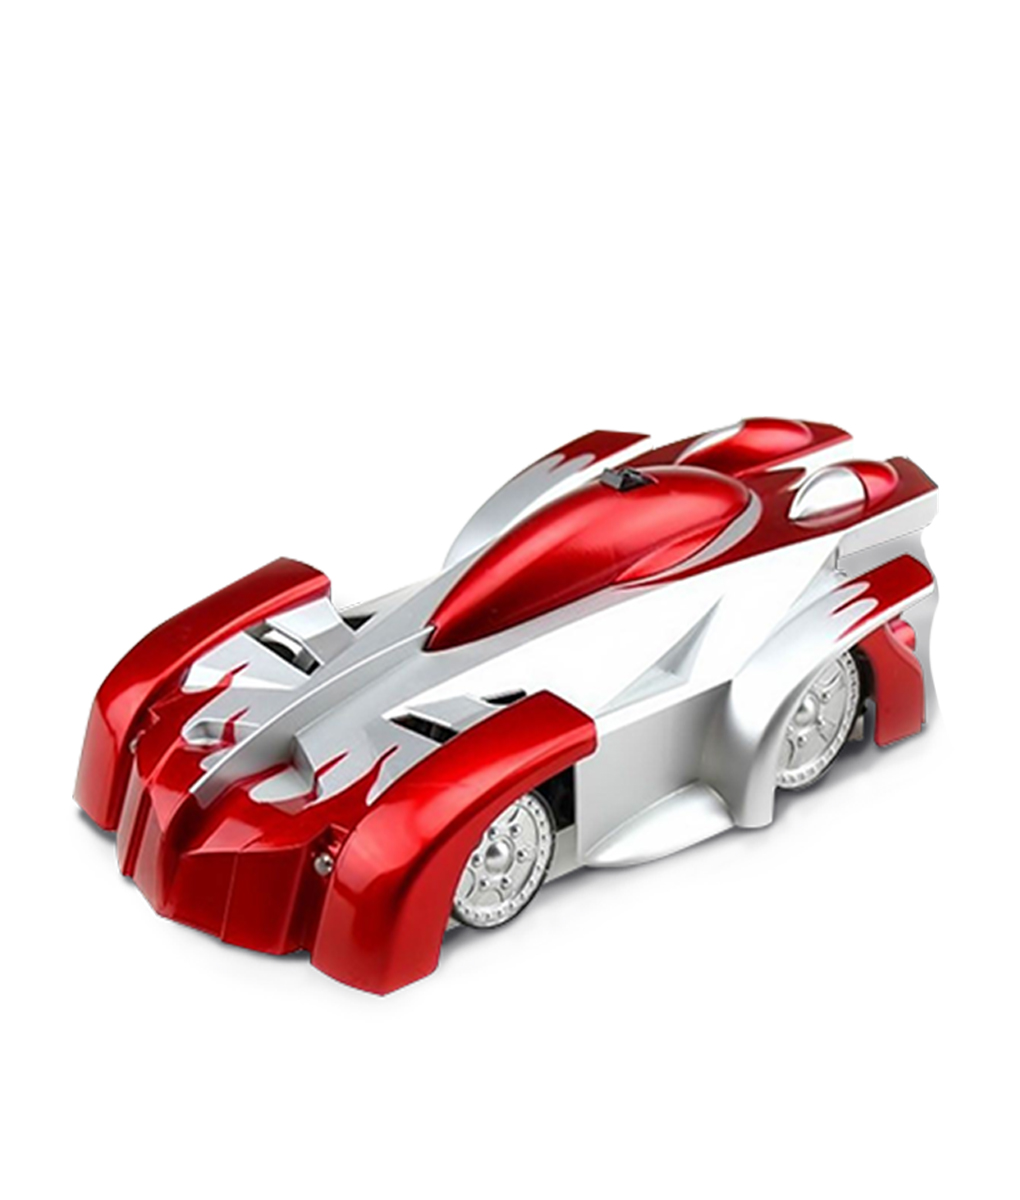 toy cars that drive on walls & ceilings